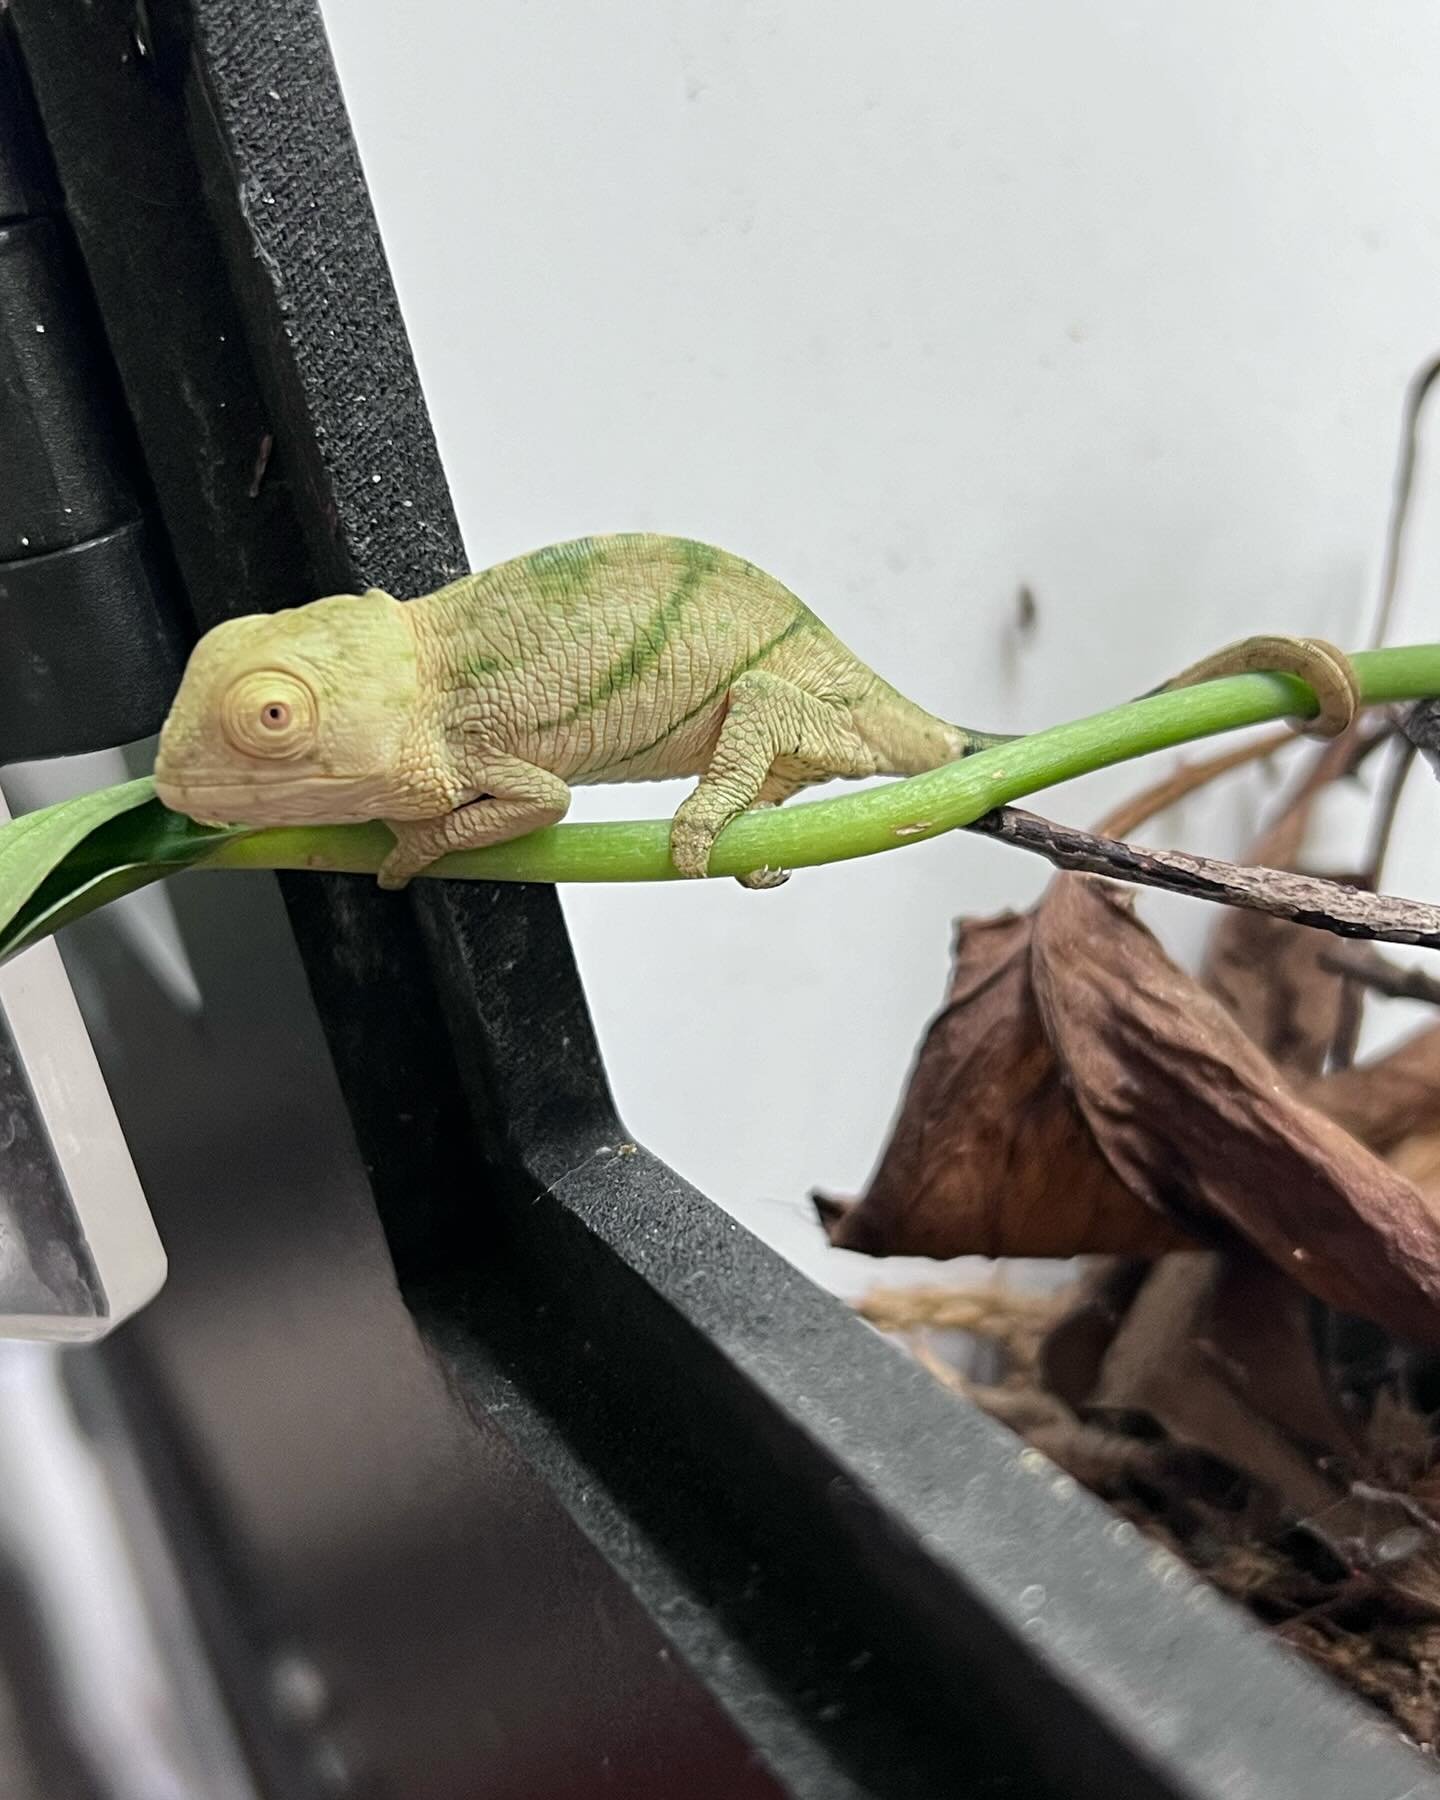 Adding these Six Spectacular Captive Hatched Orange Eye Parson Chameleons to the website for pre orders. Will be ready to fly in a month. Prefer local pick up in Southern California. For experienced keepers only. Not every day do you get the chance t